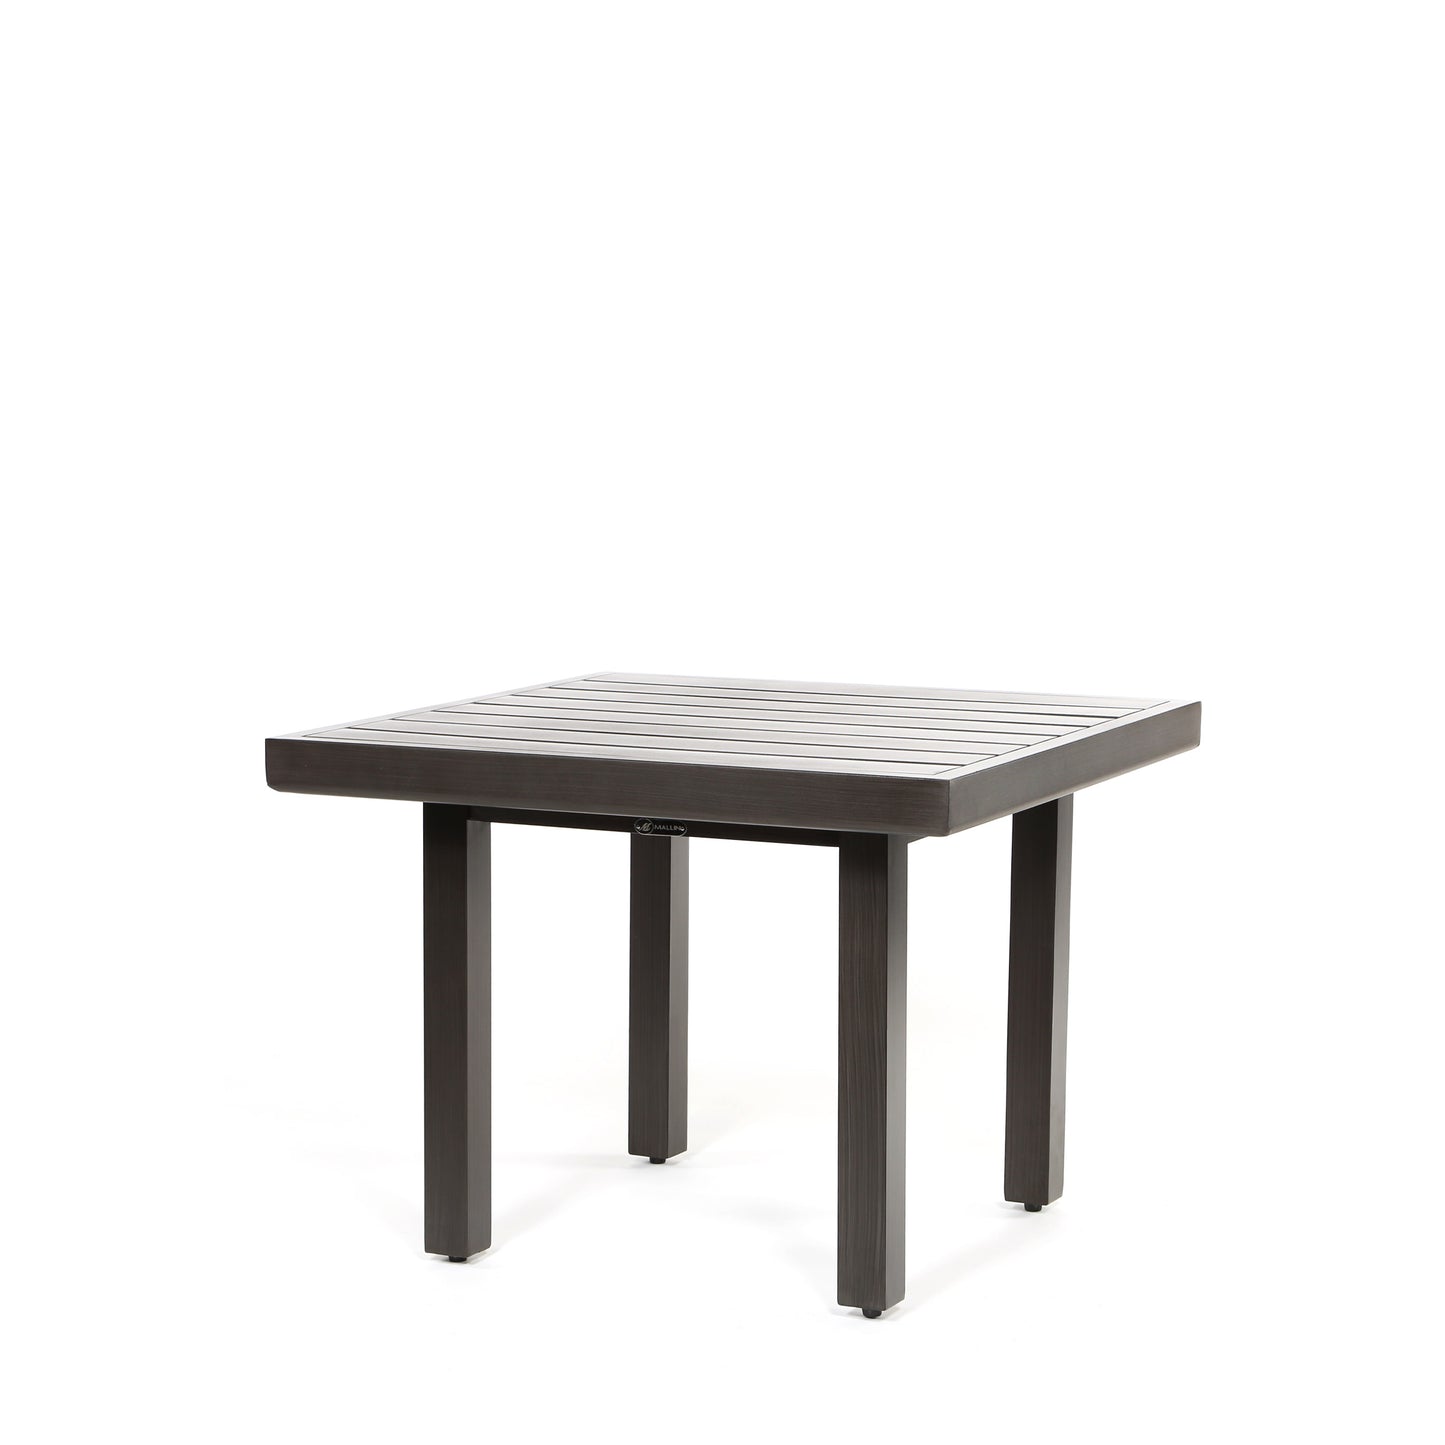 Trinidad Collection 29 Square End Table Weathered Charcoal Finish, image 1